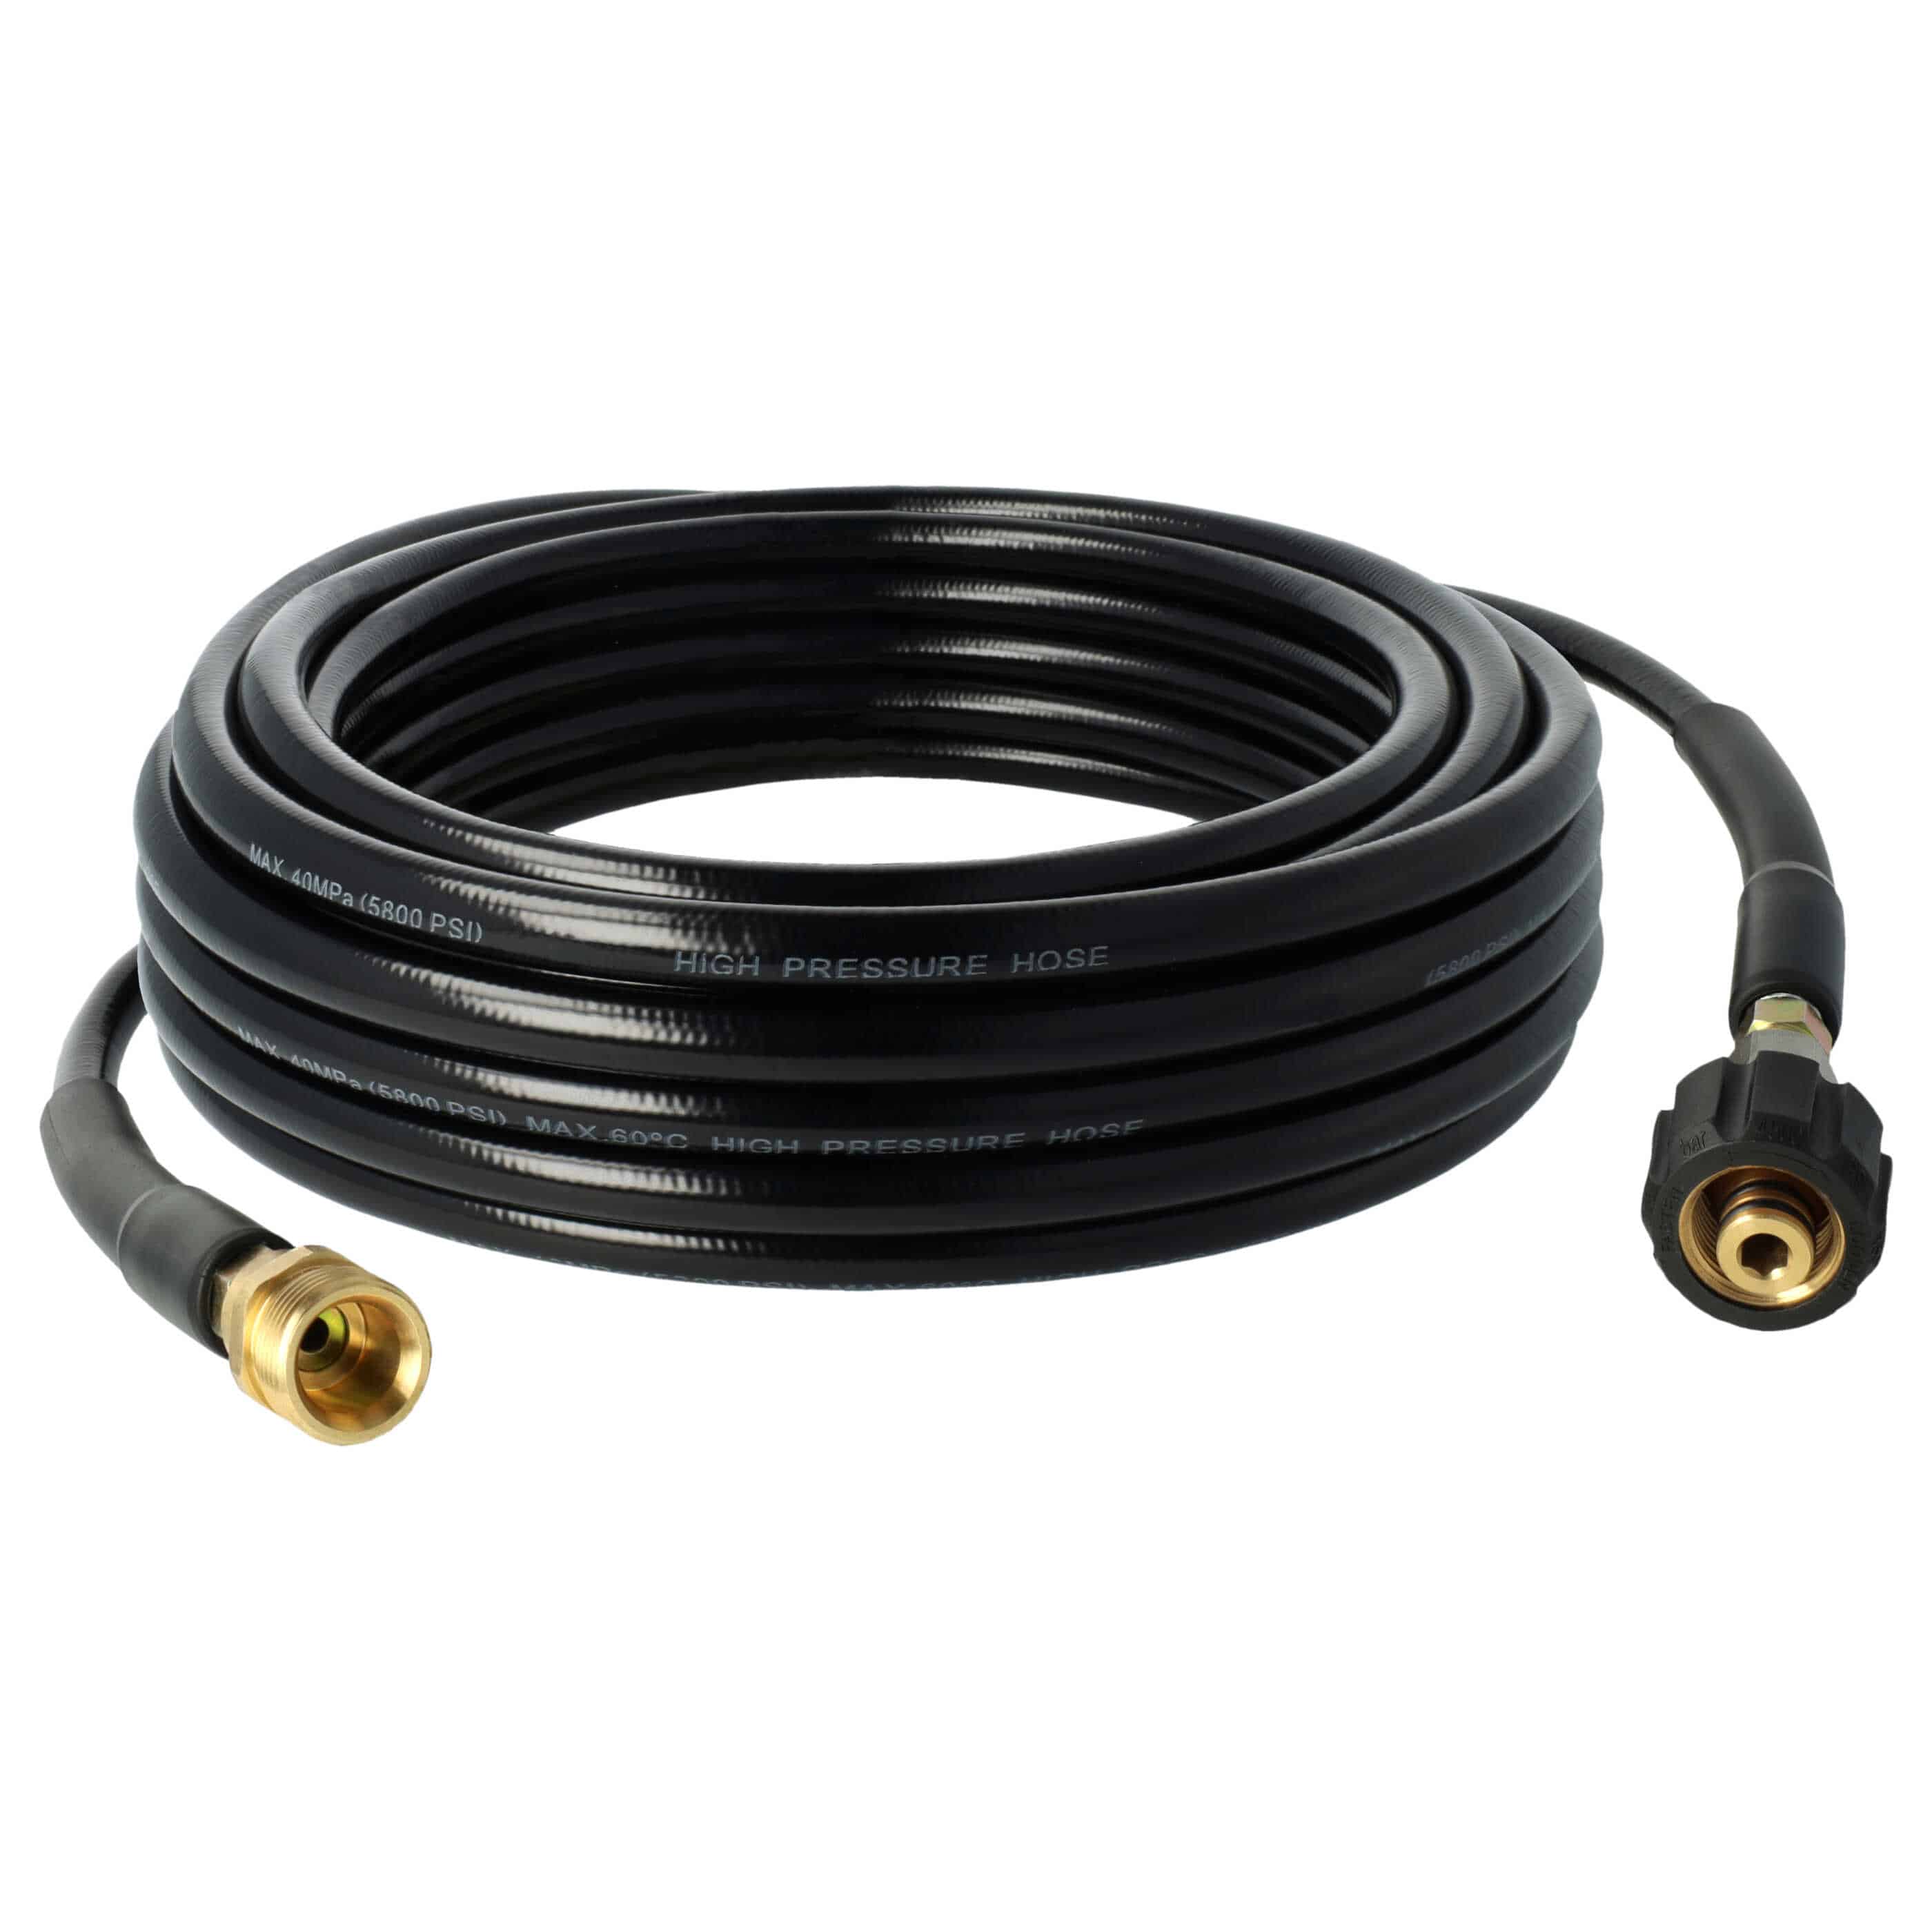 vhbw 10 m Extension Hose High-Pressure Cleaner with M22 x 1.5 Threaded Connection Black